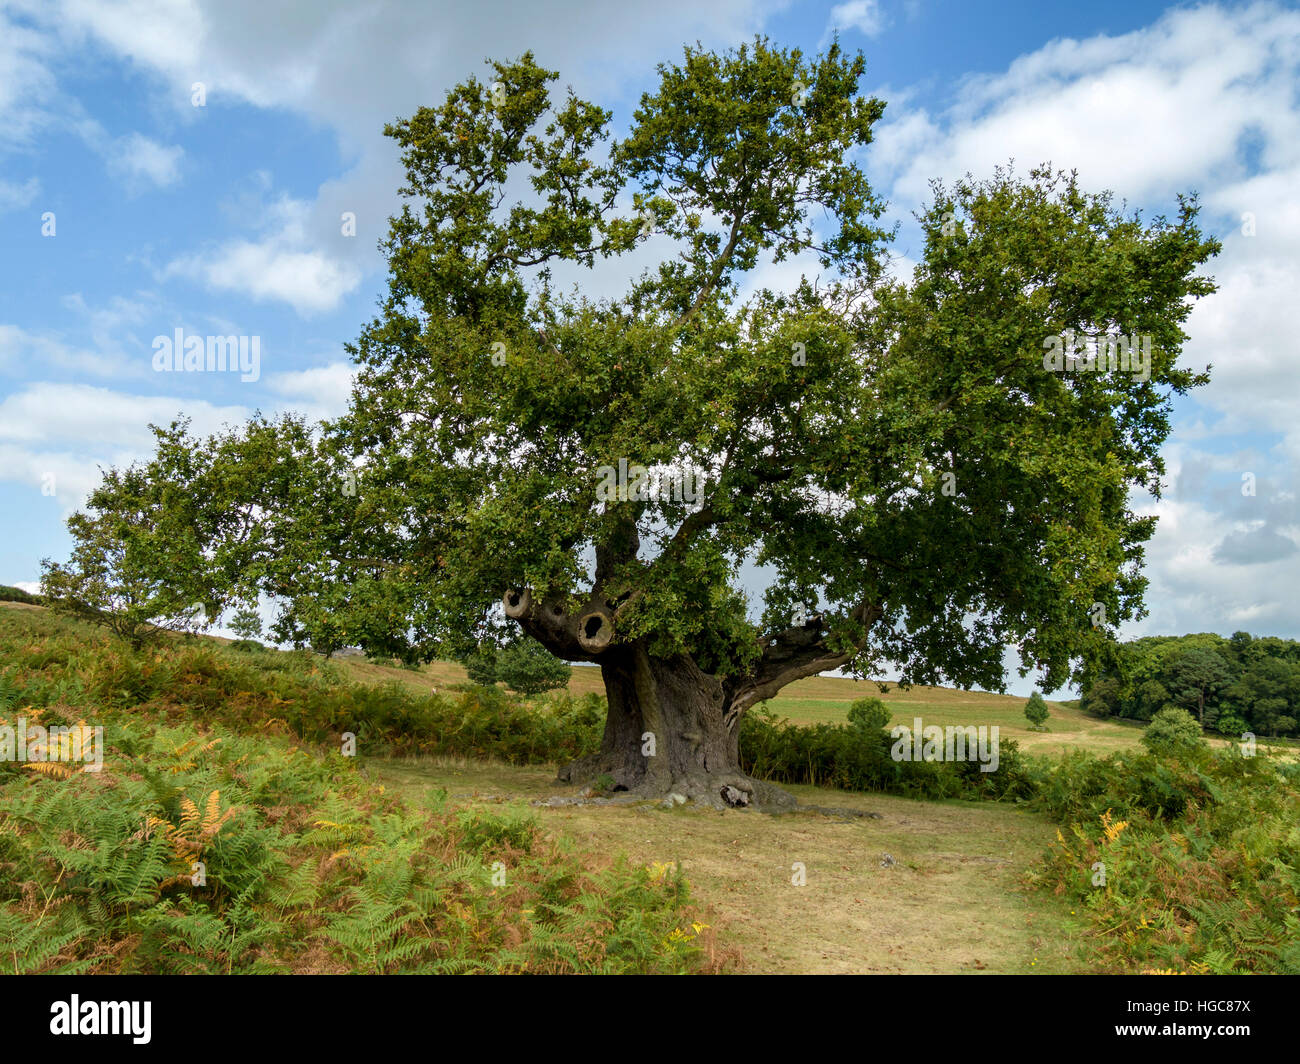 Large old English Oak tree against blue sky in Bradgate Country Park, Leicestershire, England, UK. Stock Photo